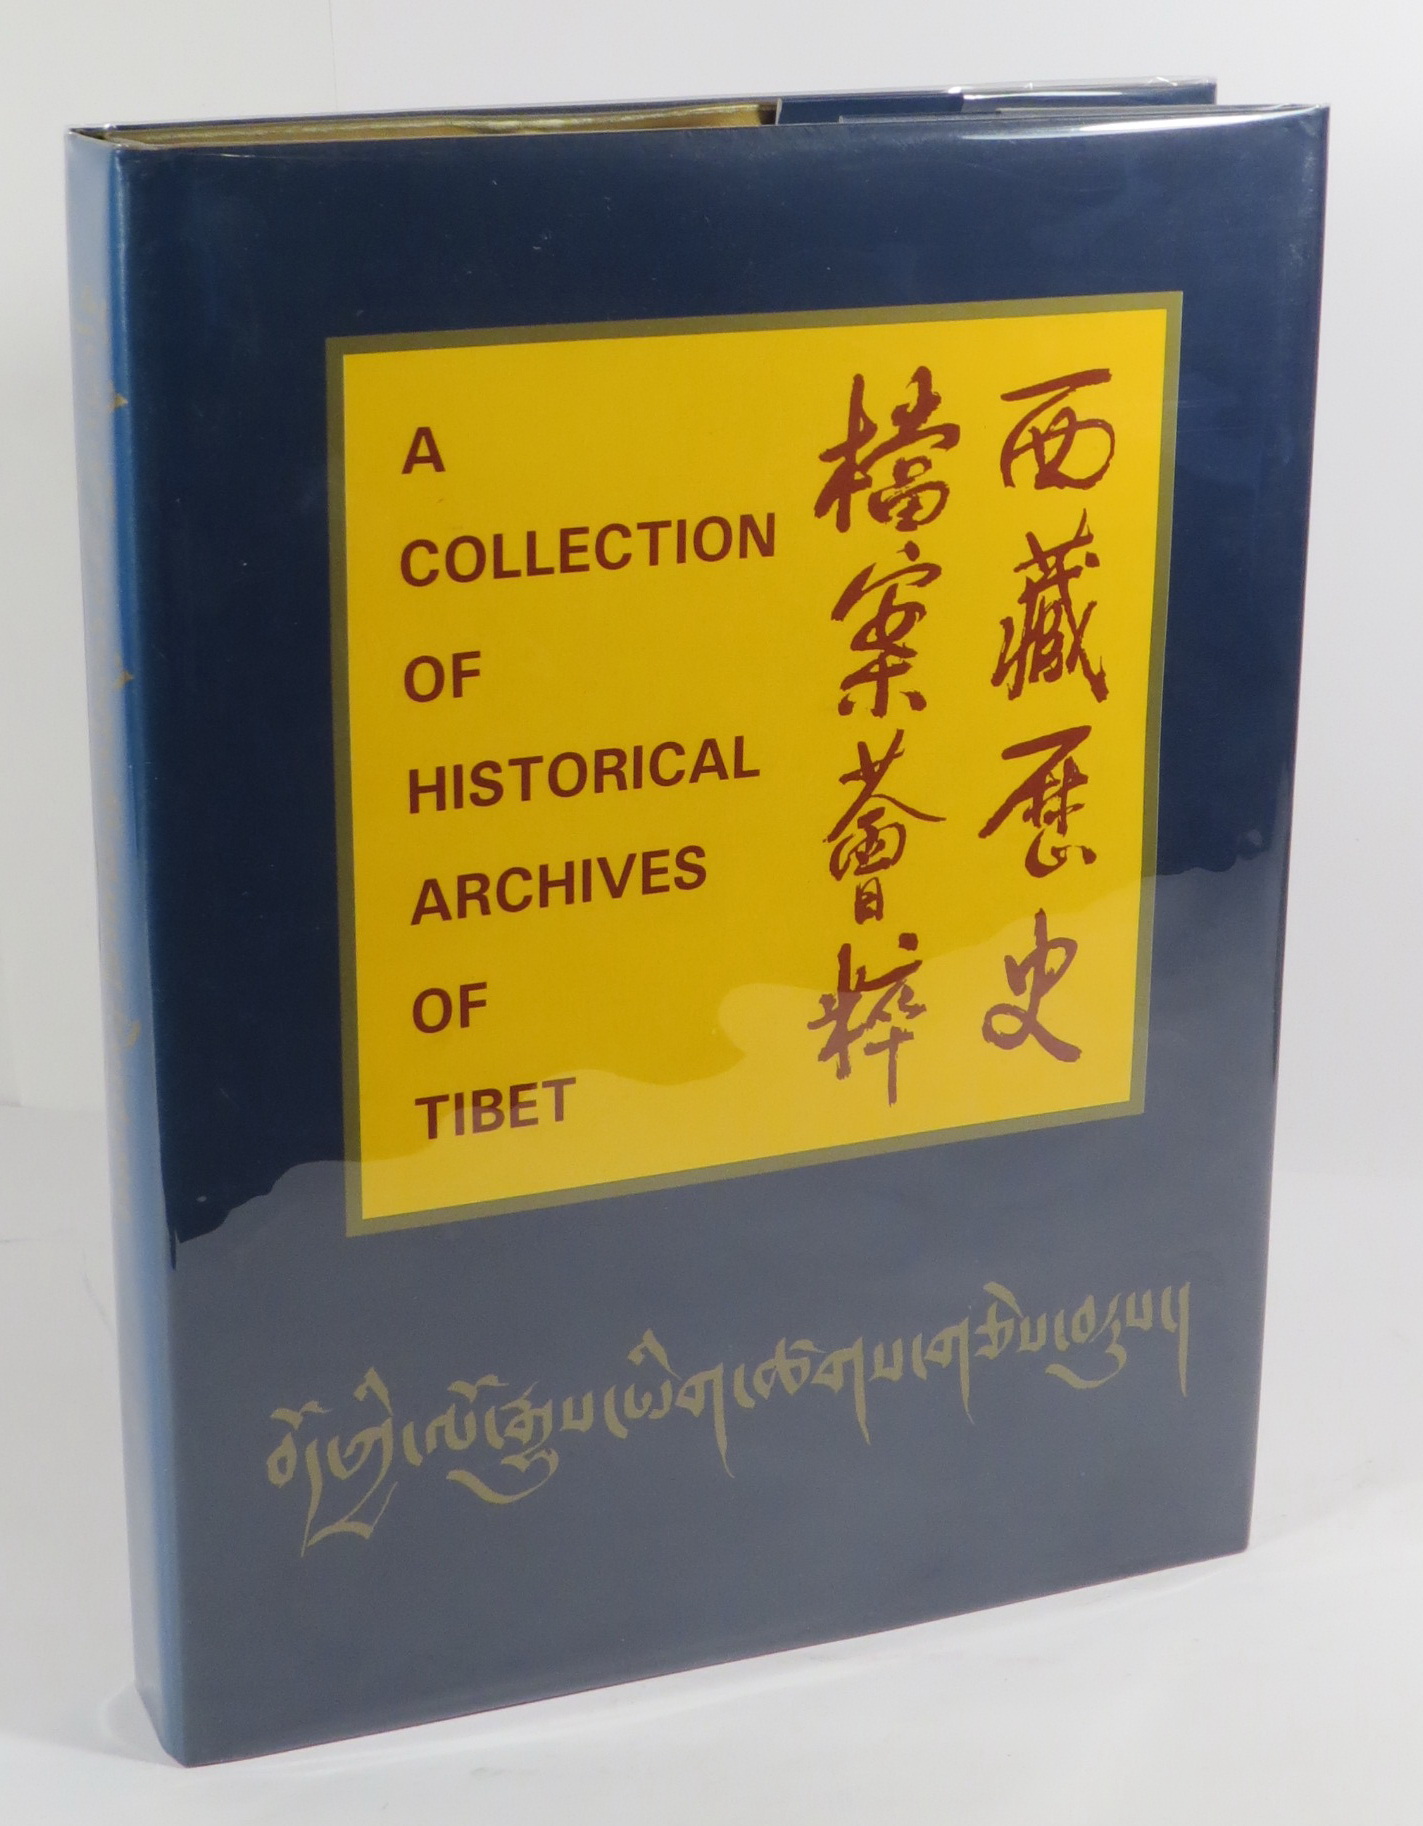 A Collection of Historical Archives of Tibet - The Archives of the Tibet Autonomous Region